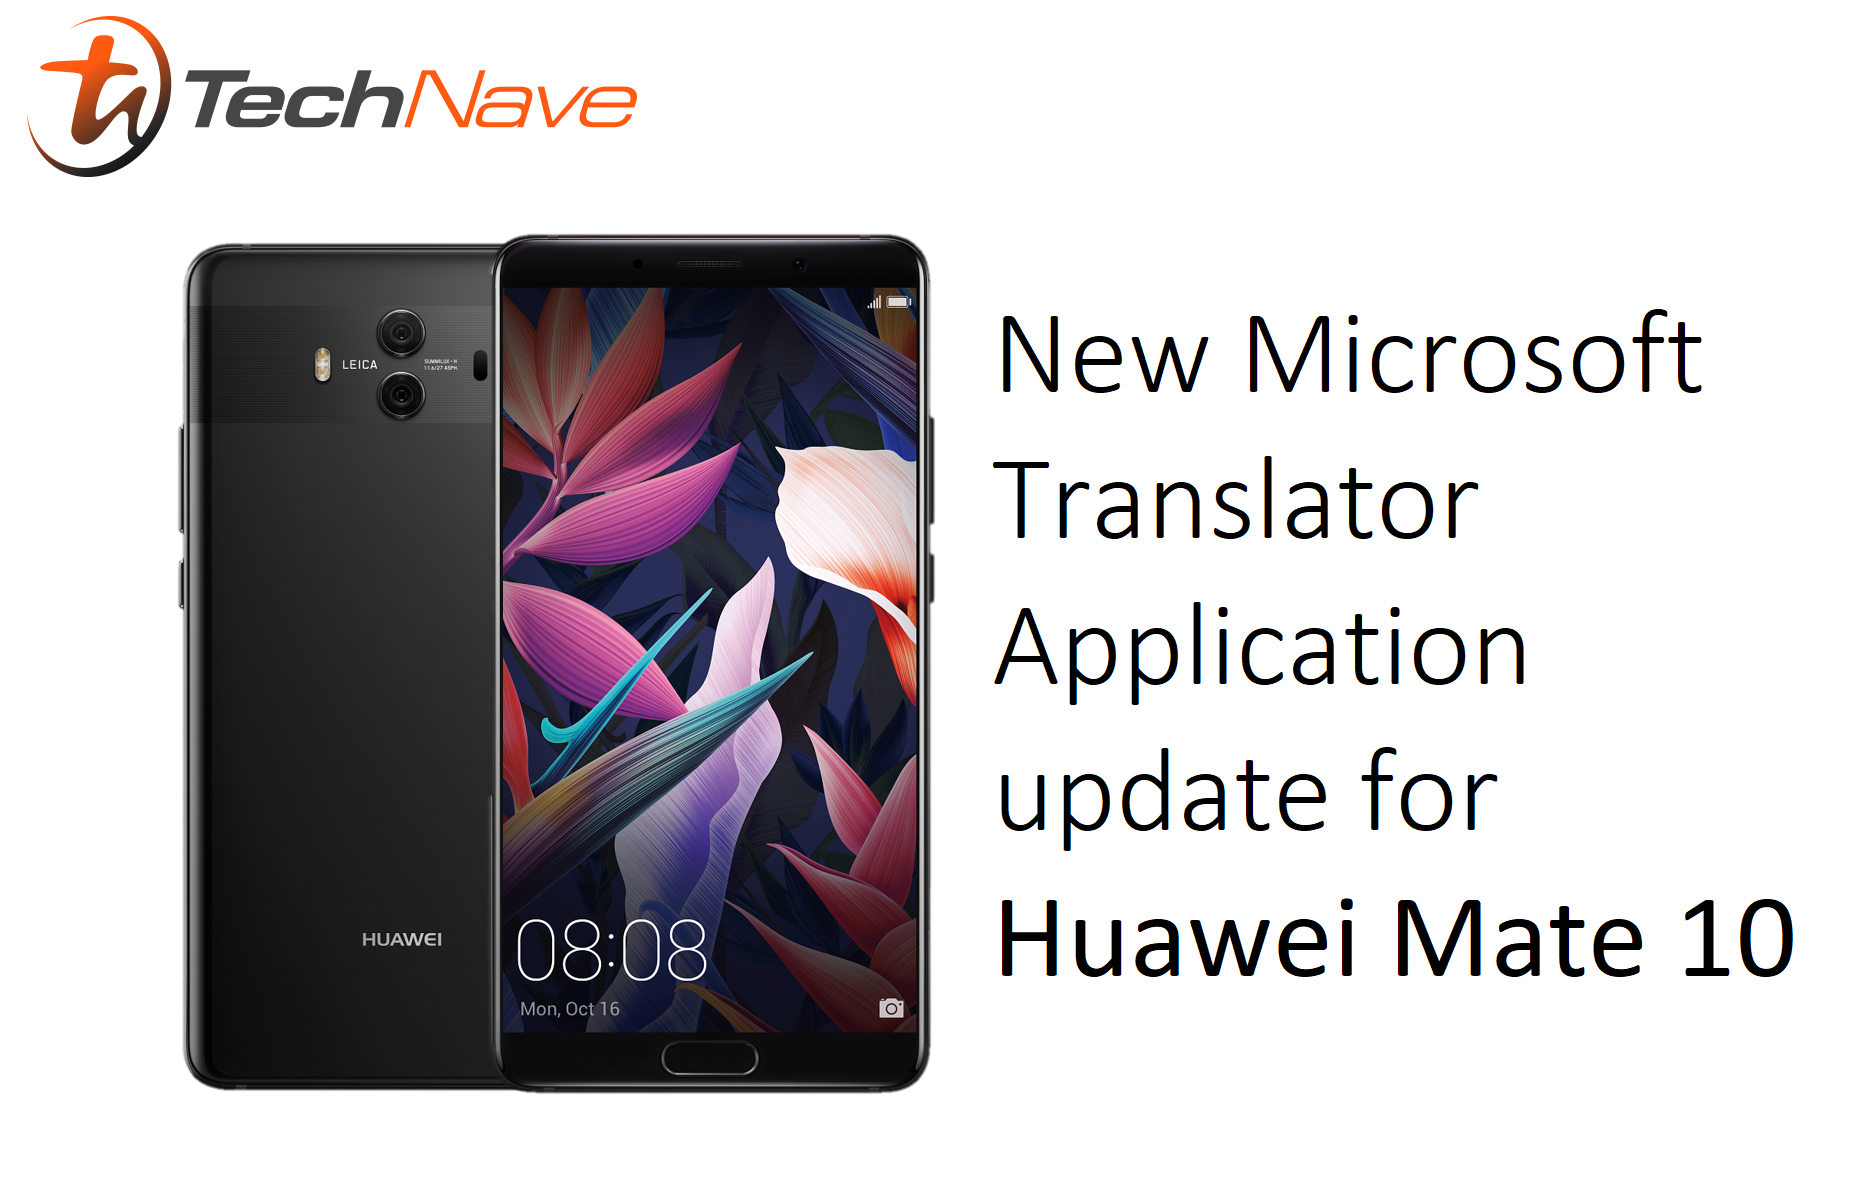 Huawei Mate 10's new software update brings you over 60 translations